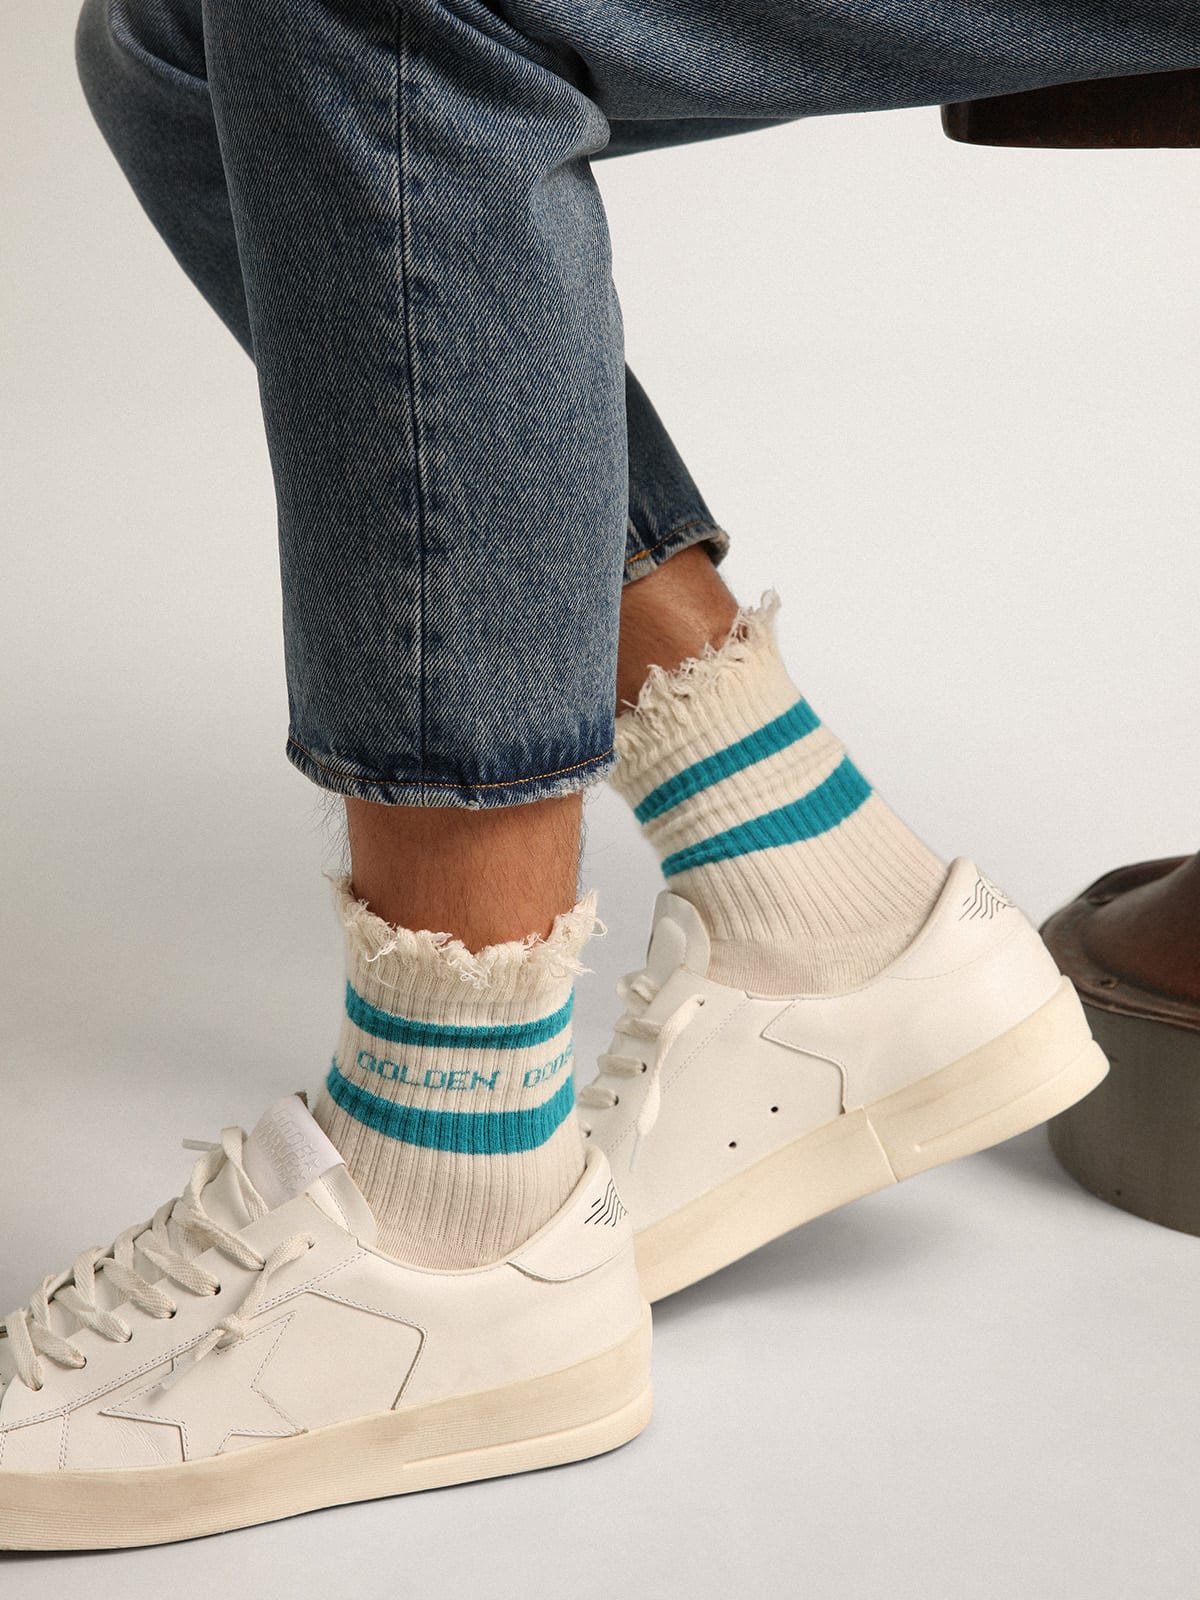 Golden Goose - Distressed-finish white socks with turquoise logo and stripes in 